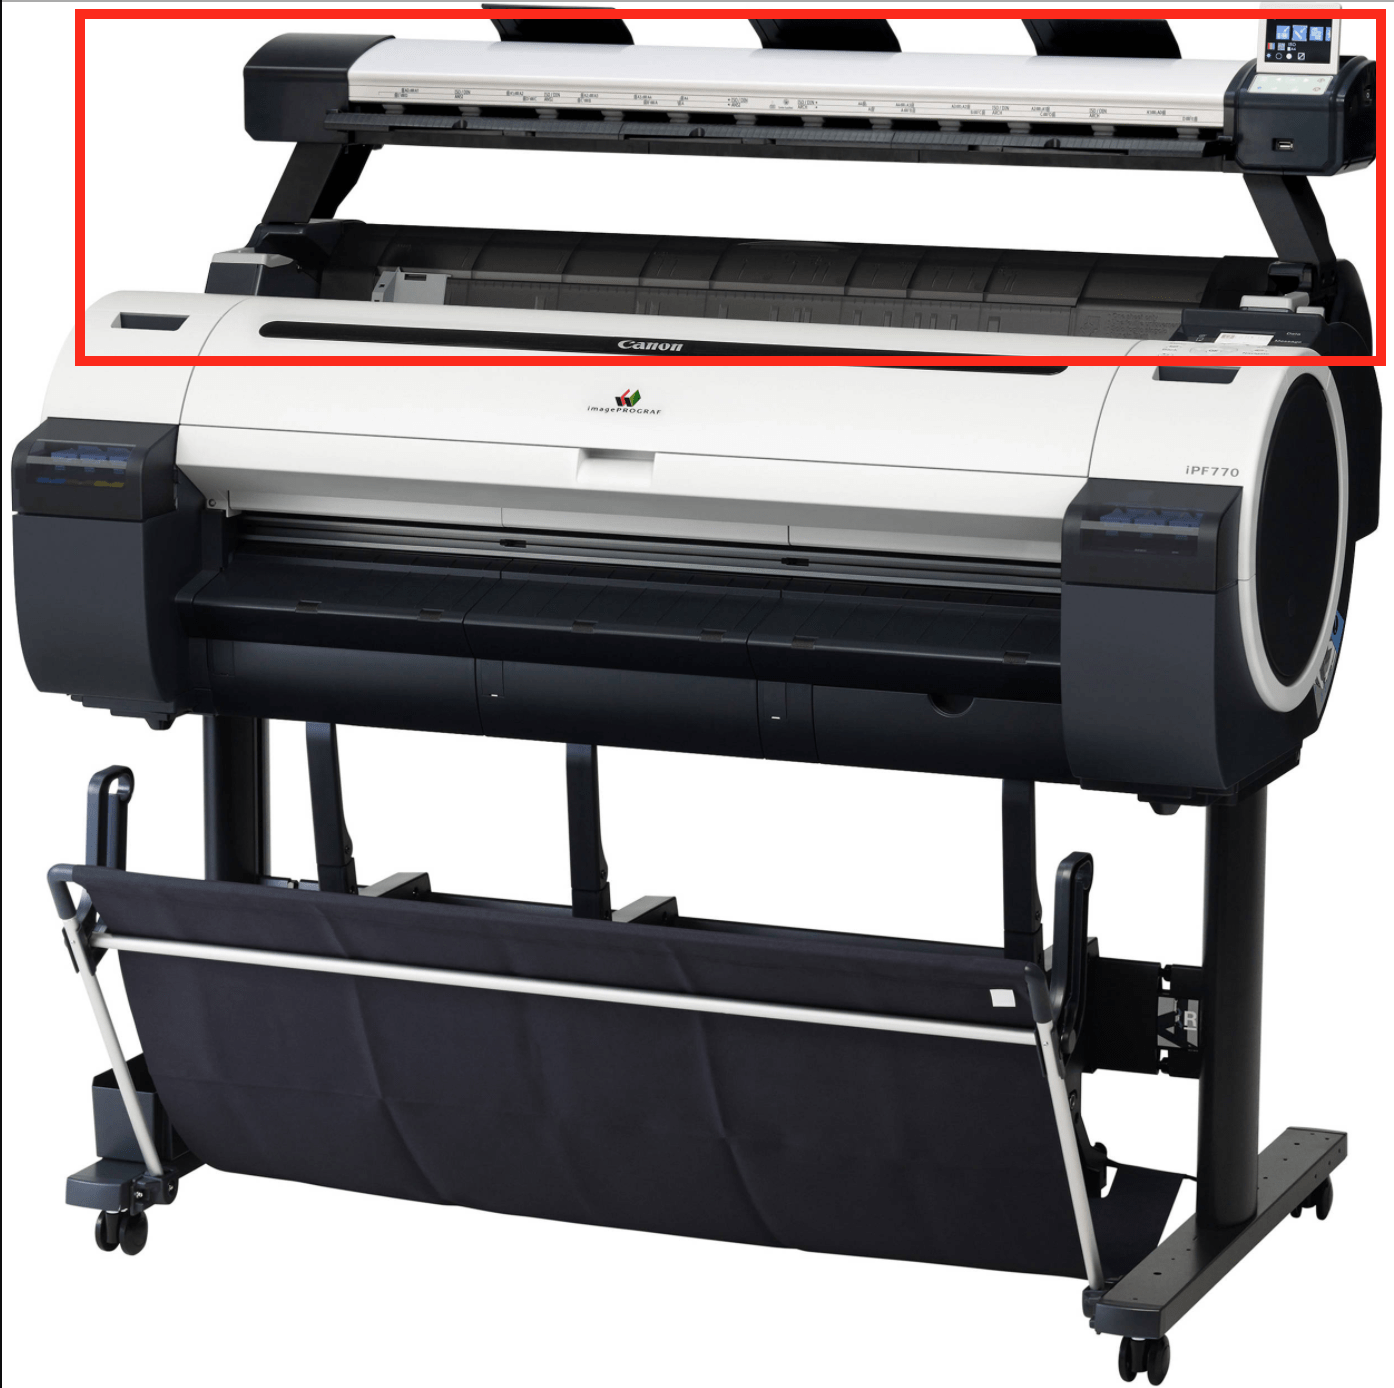 Absolute Toner 36" Wide Scanner L36ei (L36) For Canon ImagePrograf IPF770 and TA30 Large Format Canon Printer or as a Stand-alone Large Format Printer